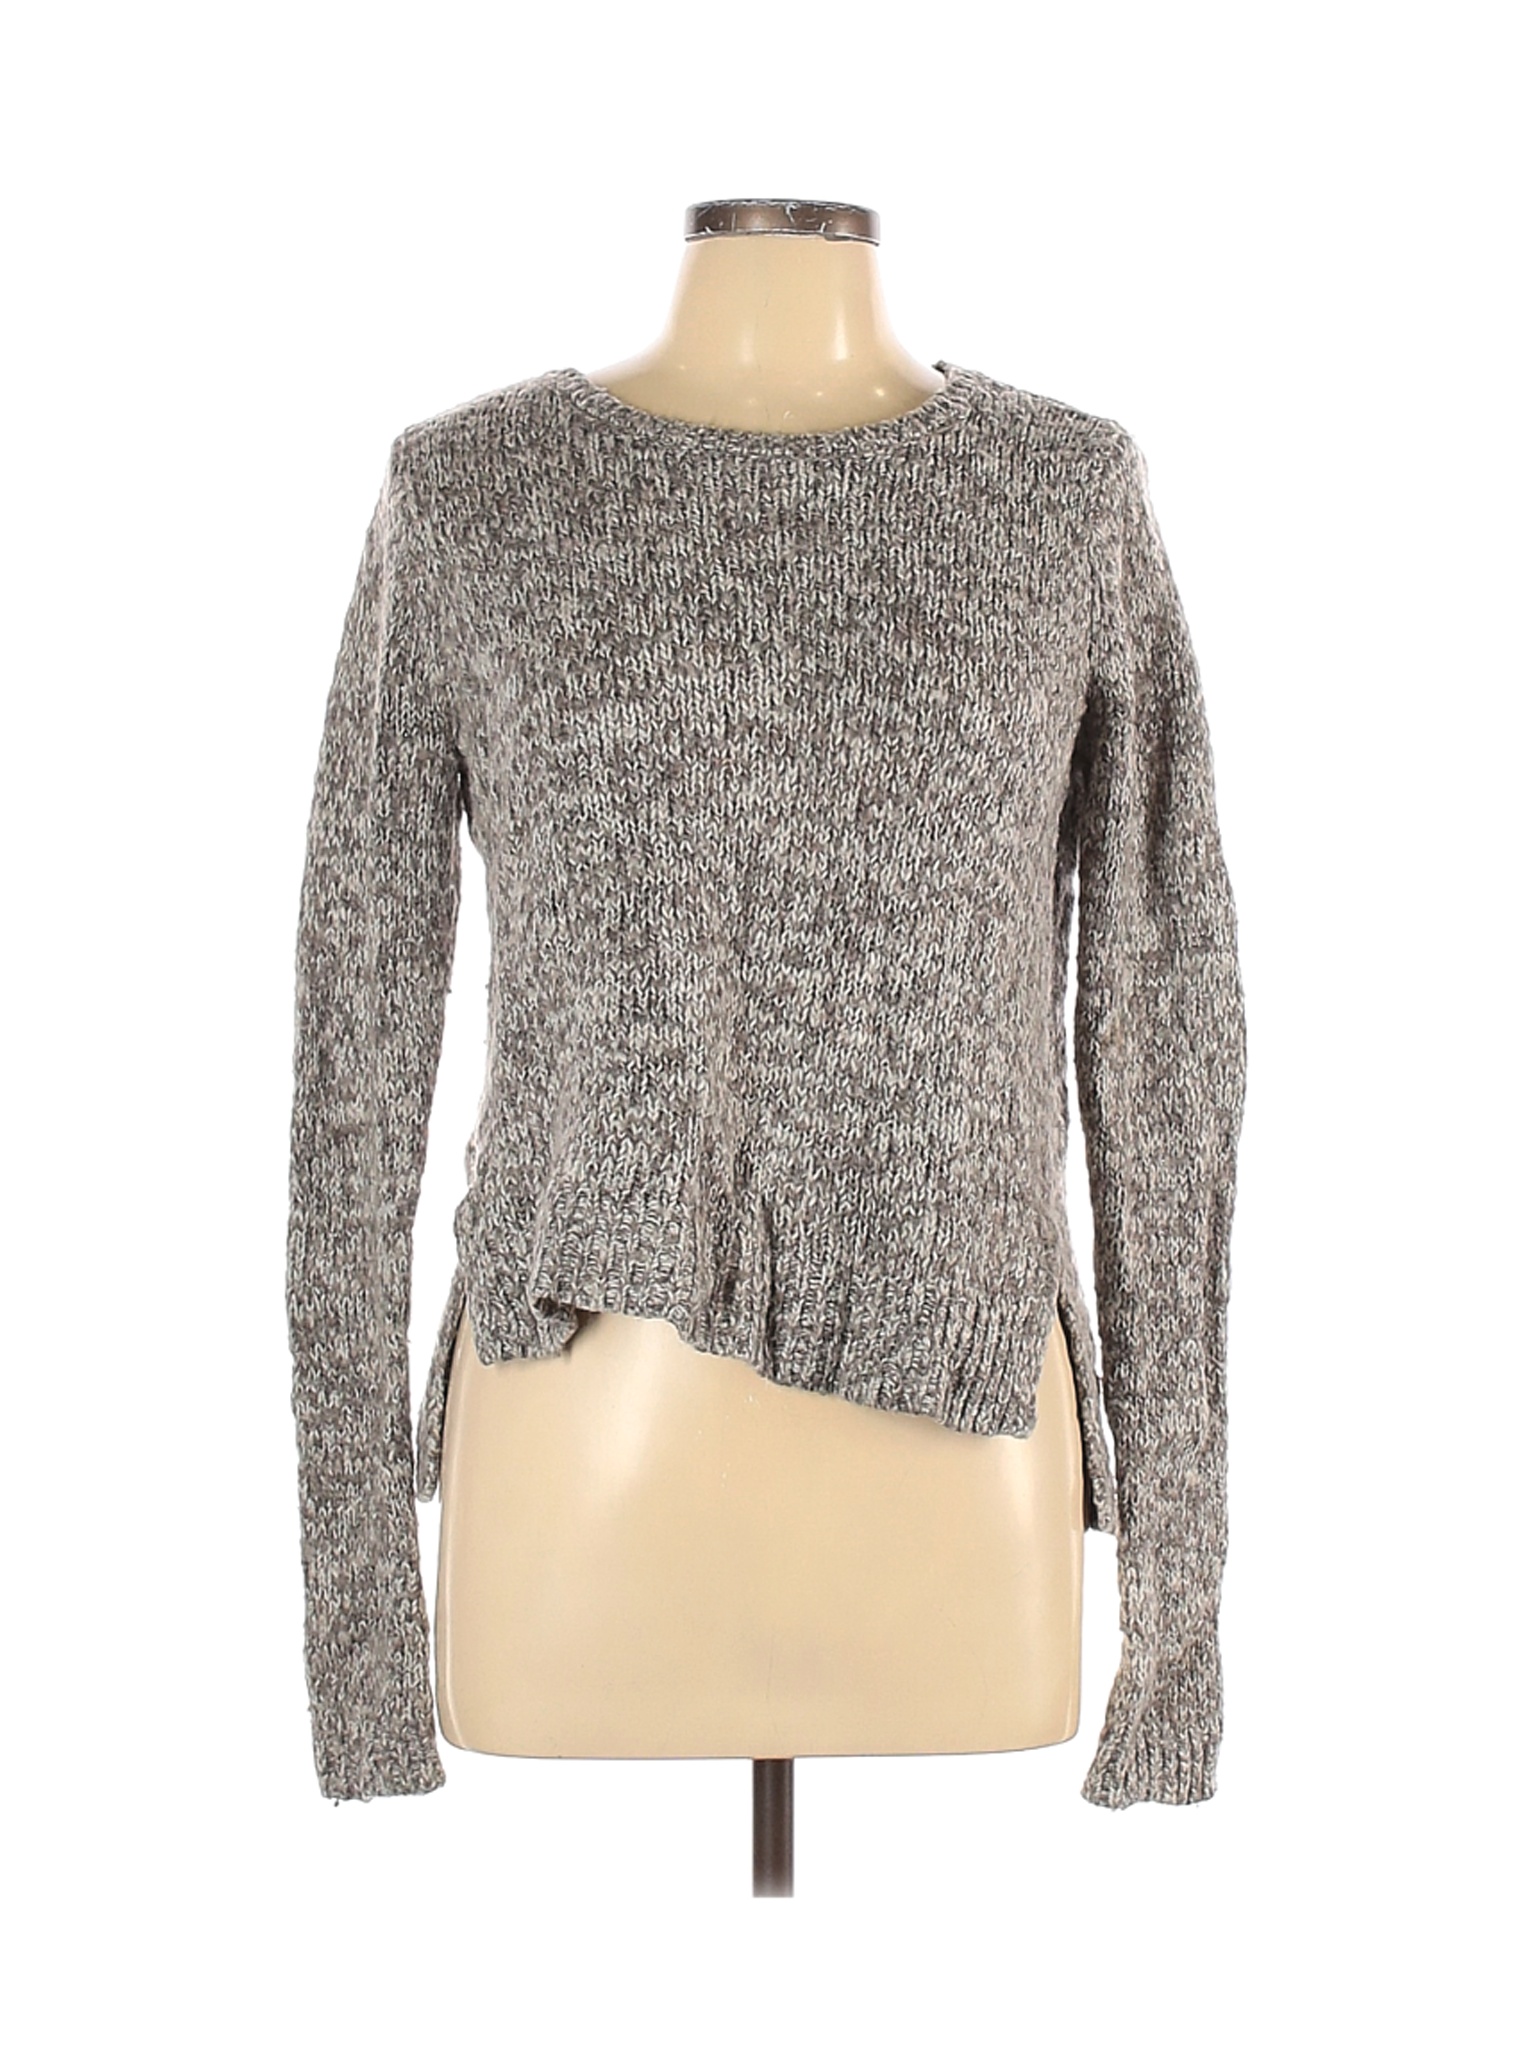 Abercrombie & Fitch Women Gray Pullover Sweater L | eBay